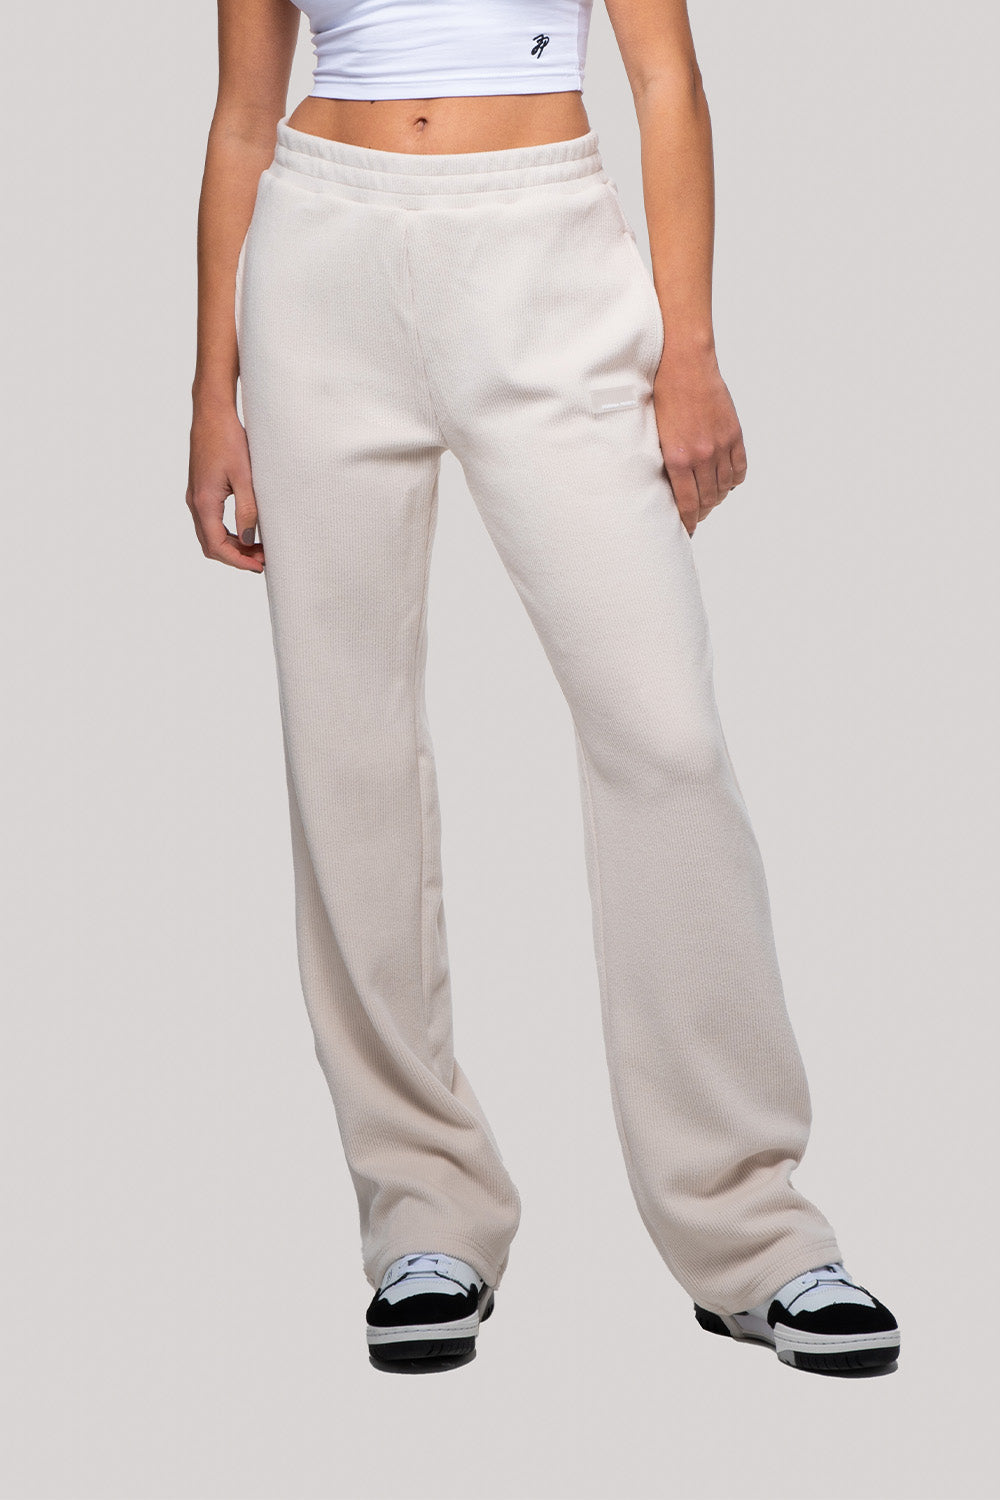 Alex - Relaxed Fit Pant